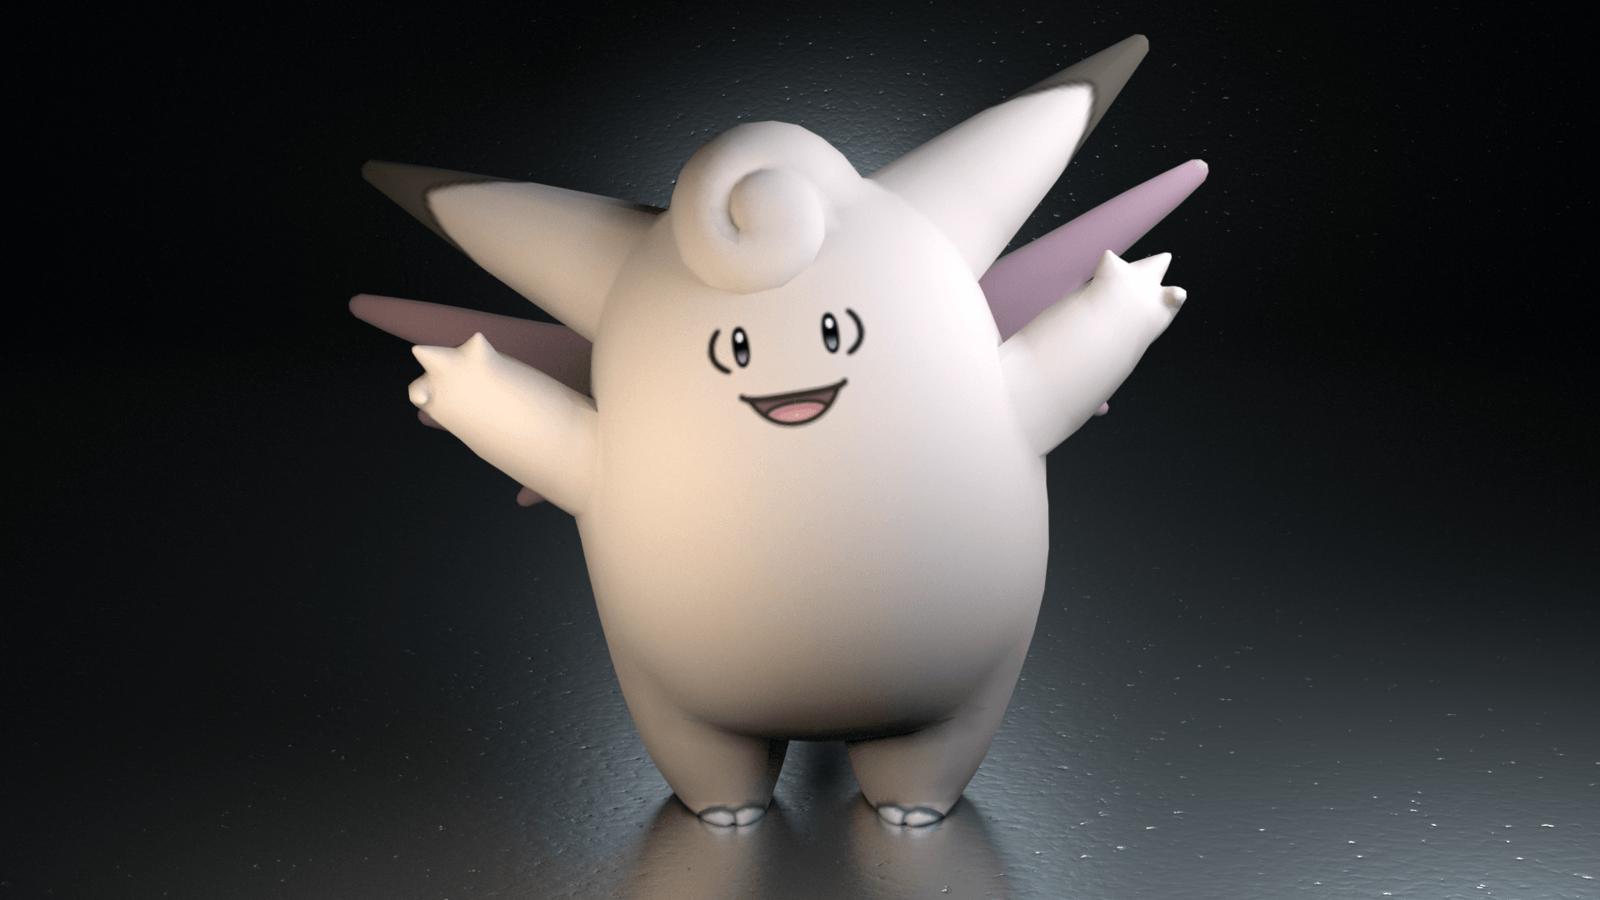 036. Clefable